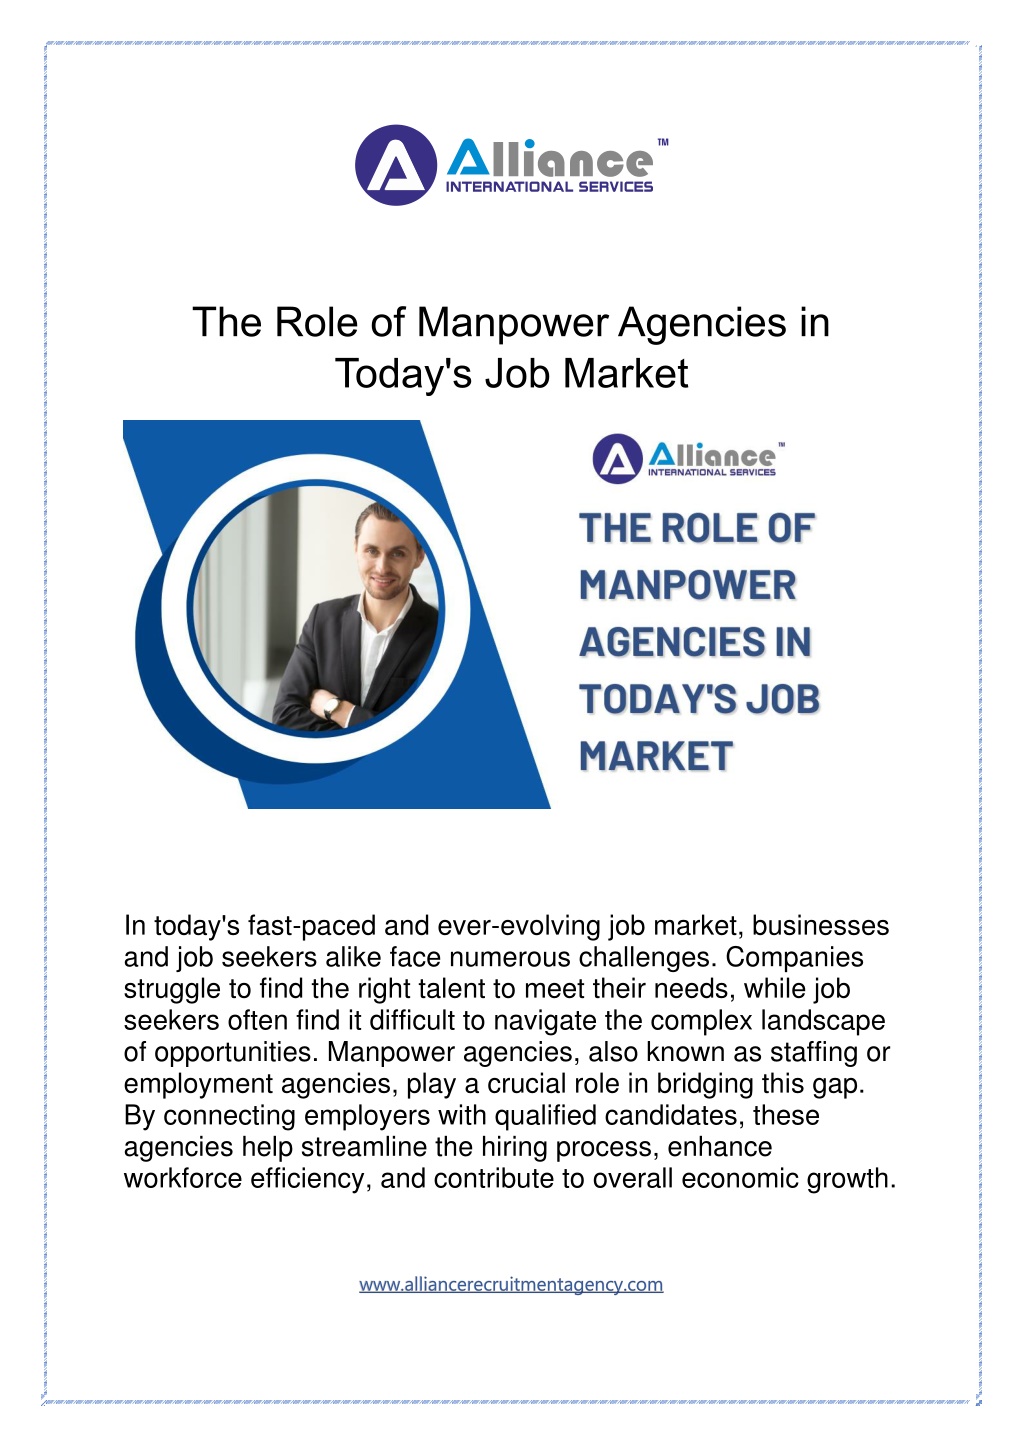 the role of manpower agencies in today l.w